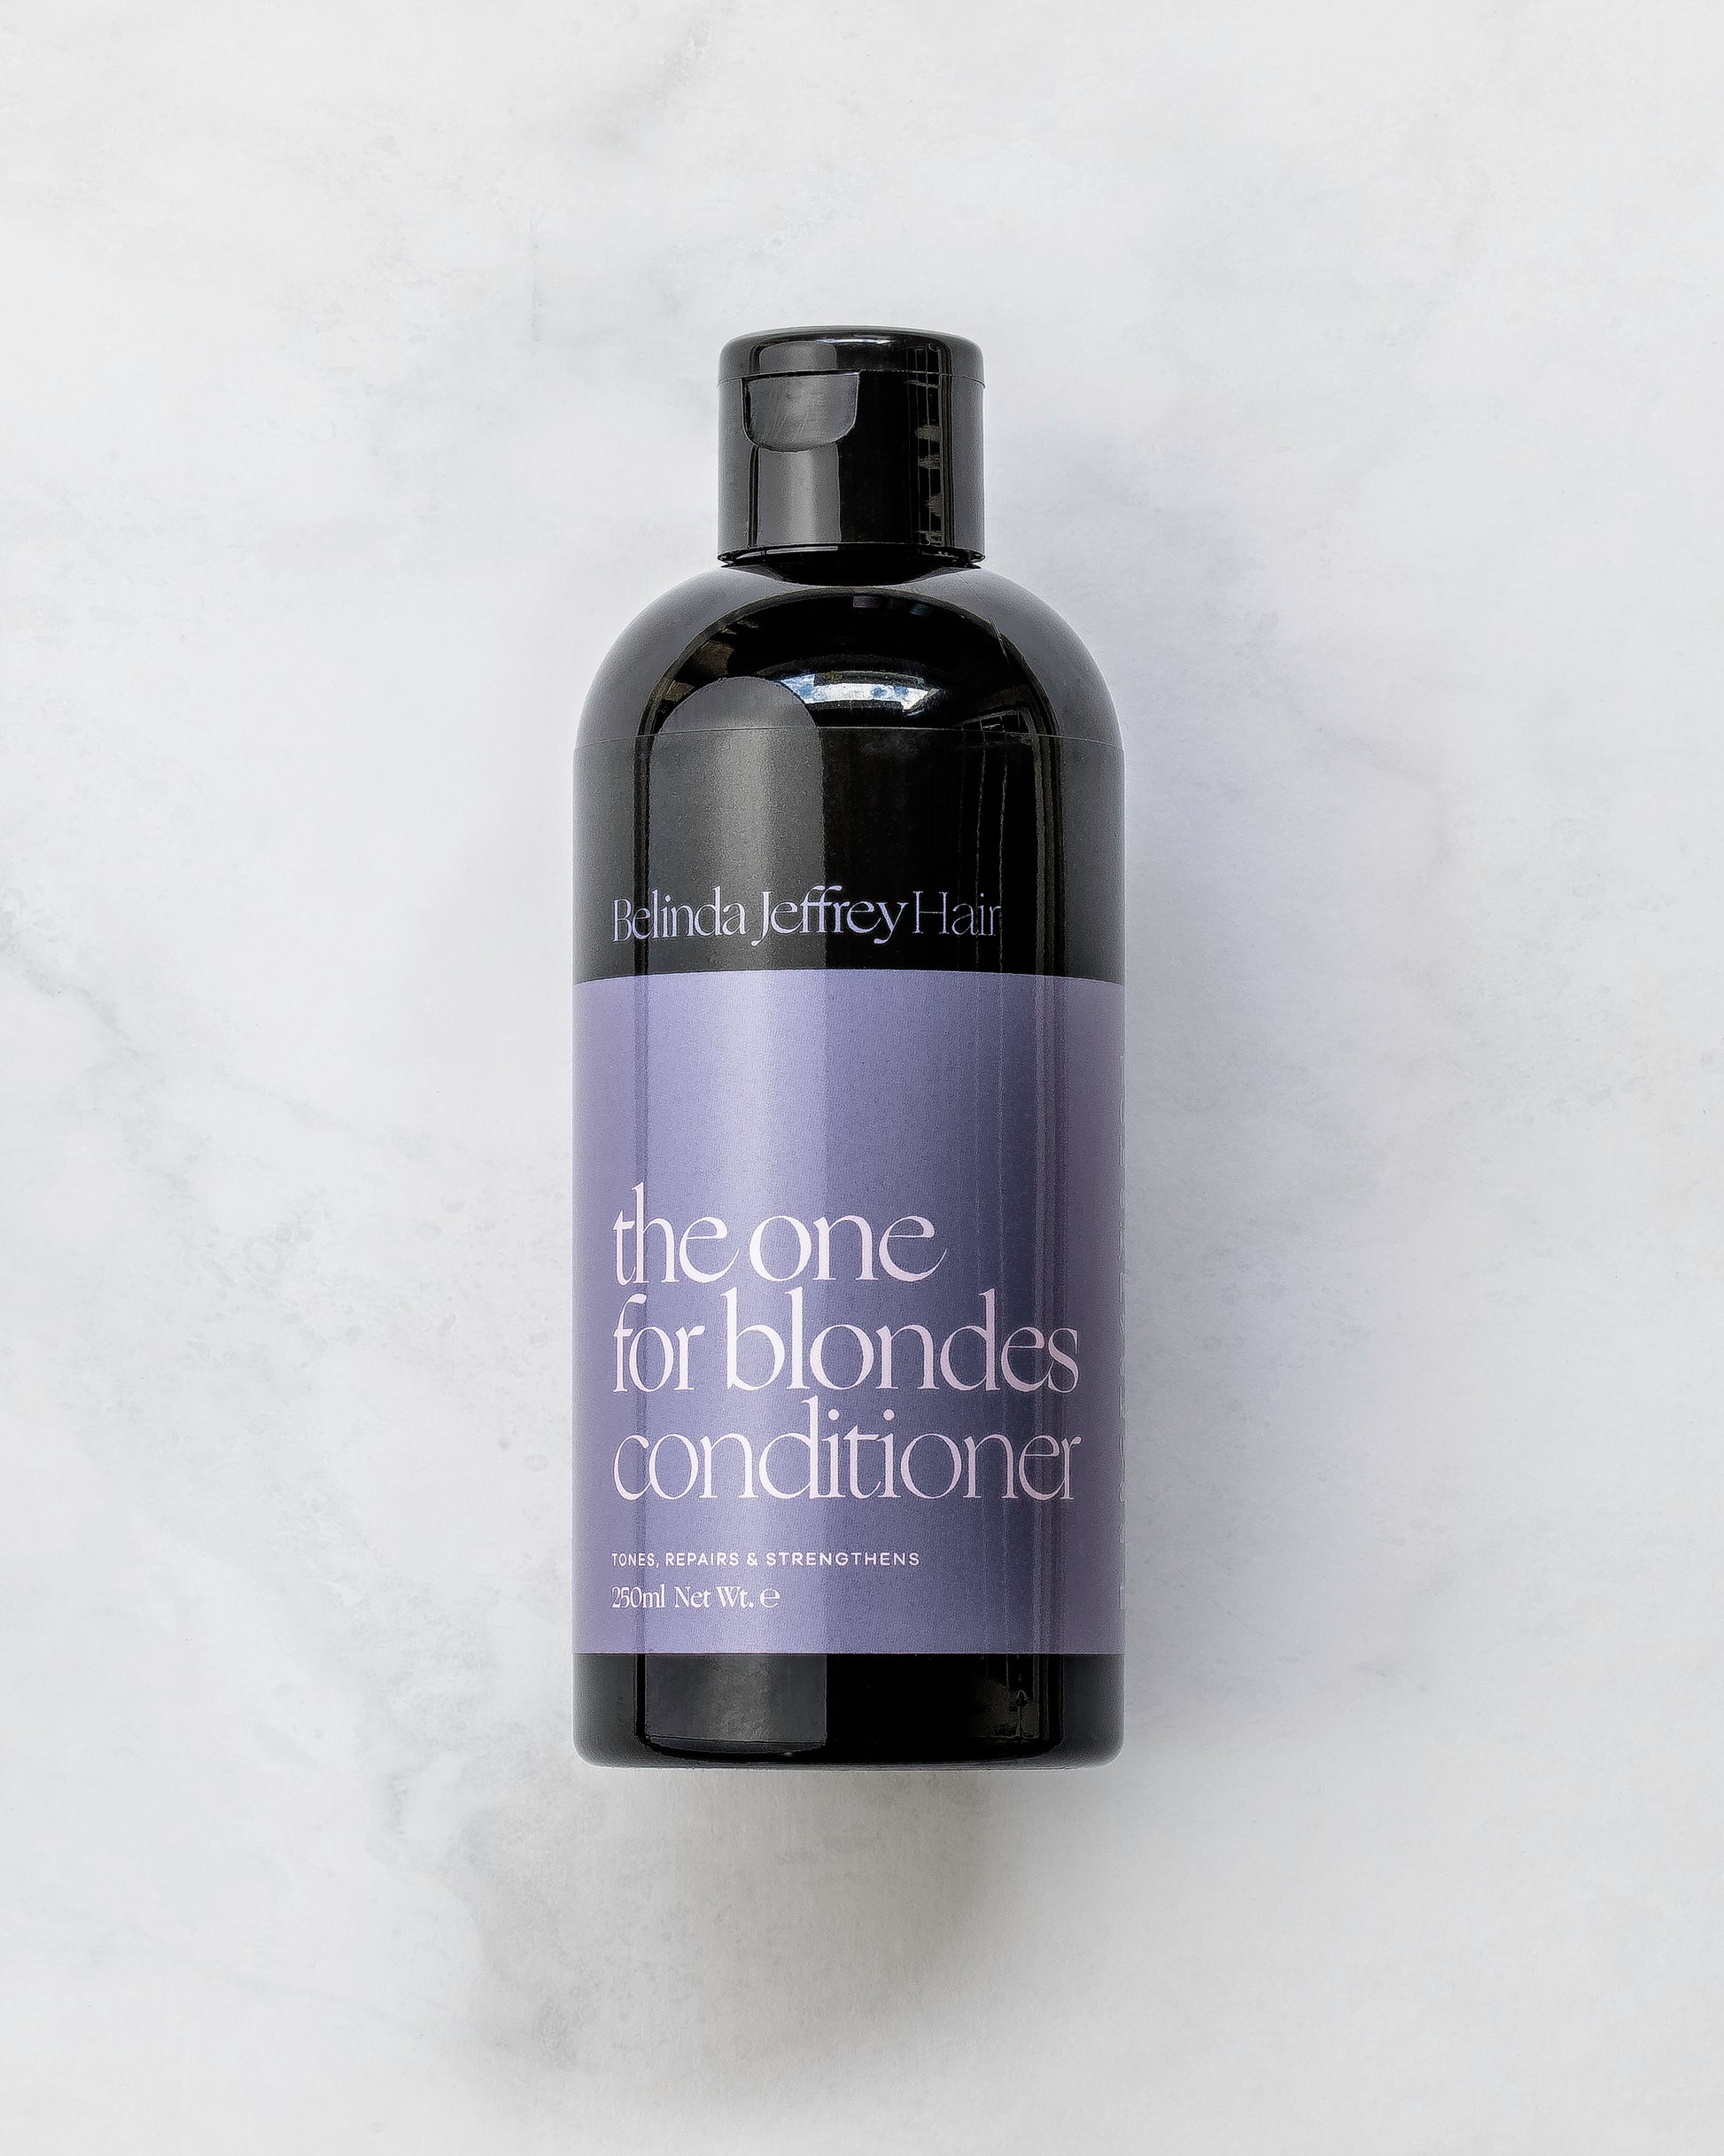 The one for blondes conditioner by Belinda Jeffrey Hair. Black bottle with purple label.